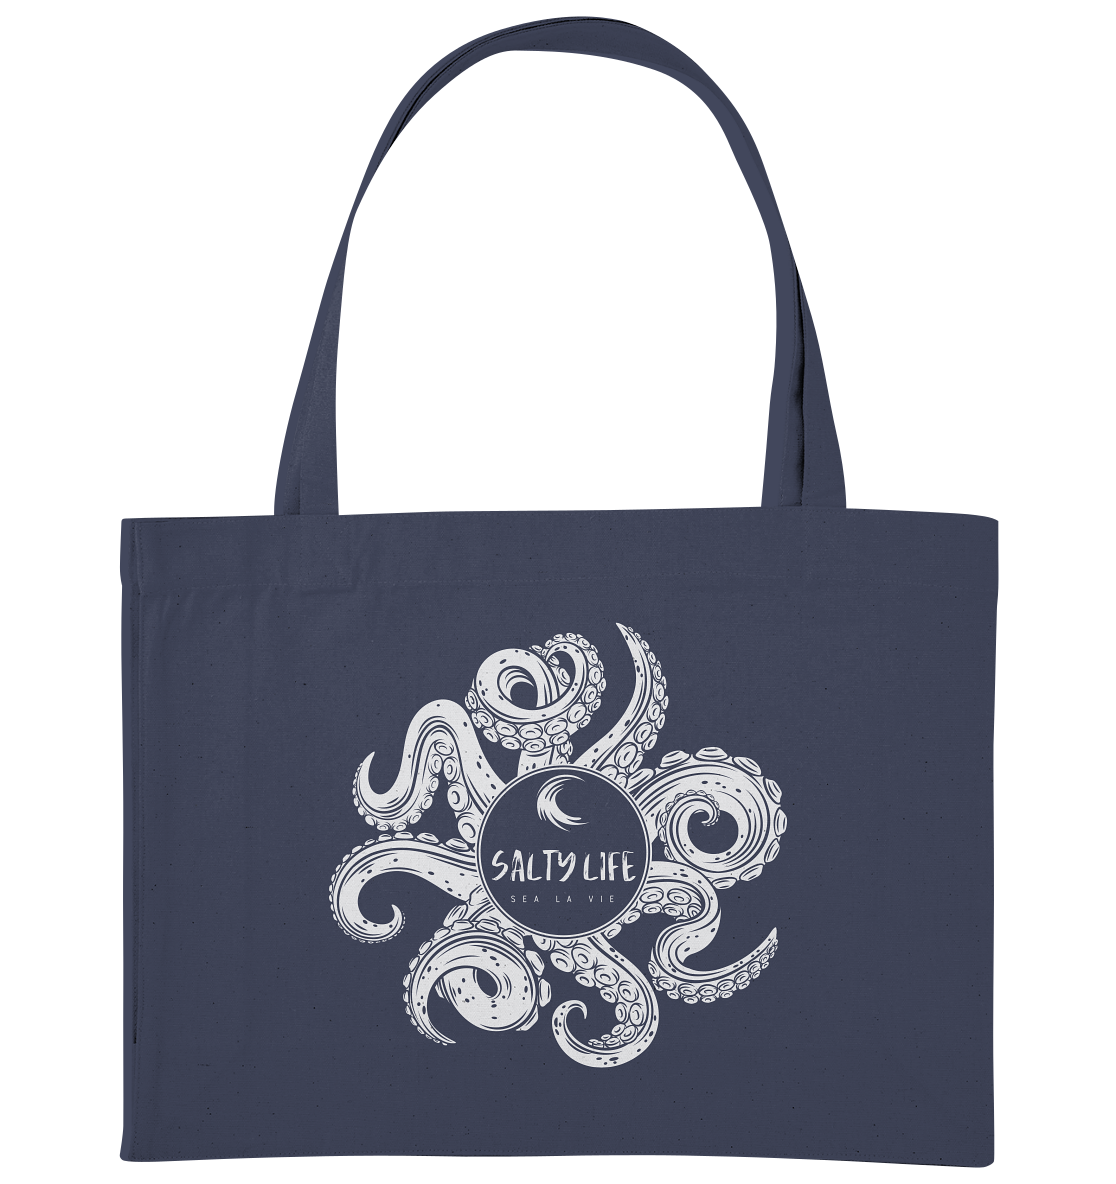 Salty Life "Under the Curse of the Octopus" - Organic Shopping-Bag